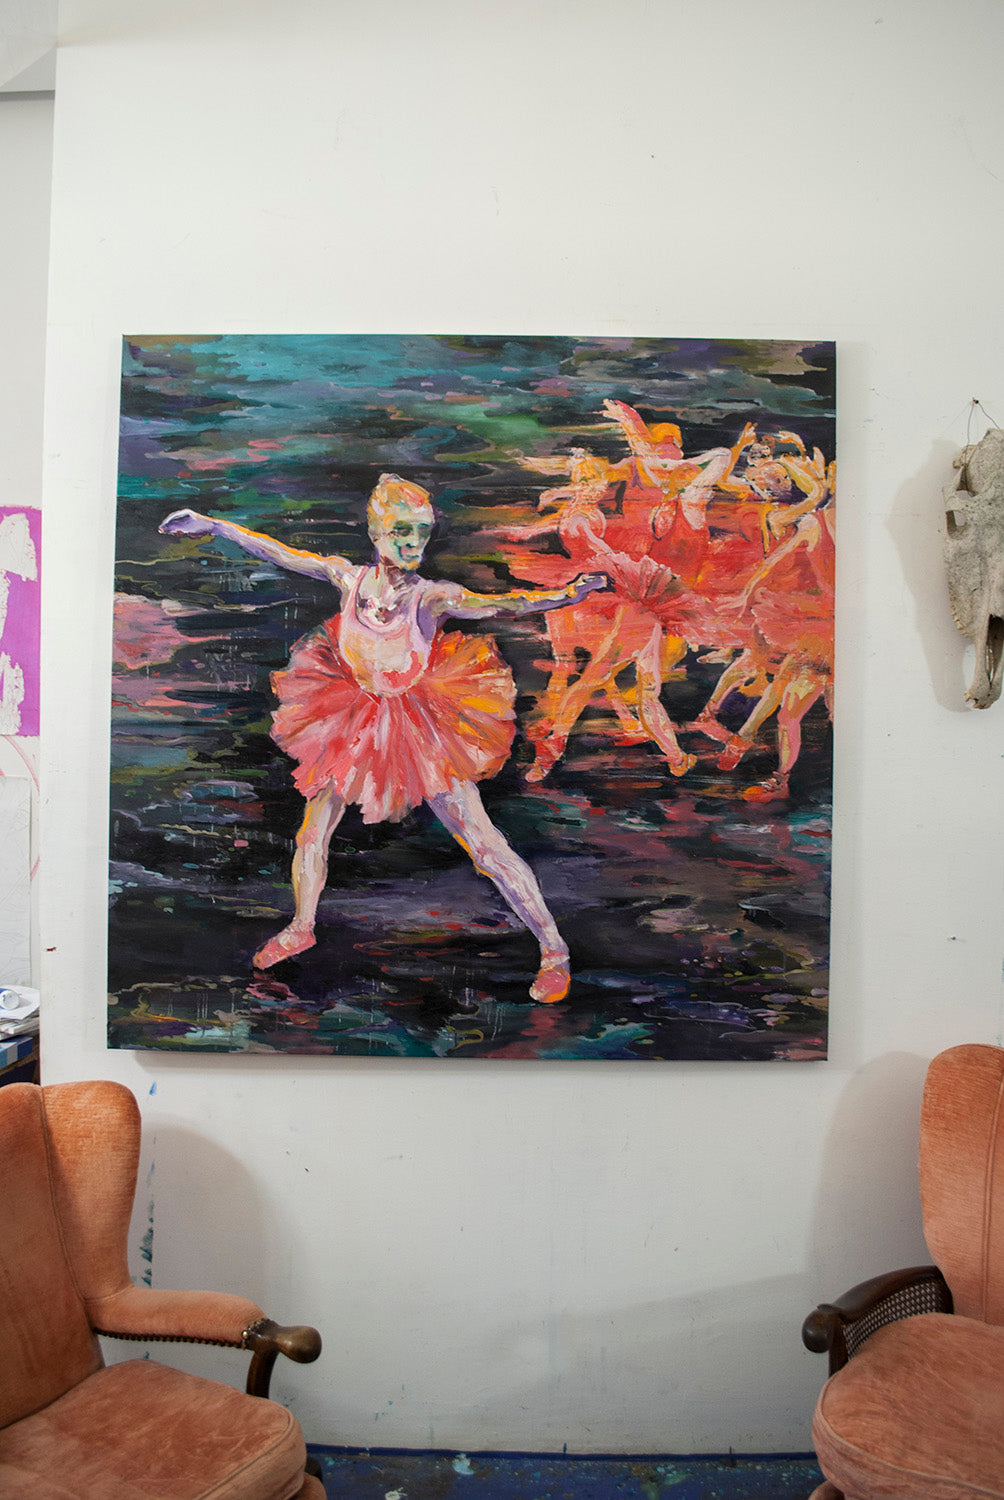 Home view of Dancers of Love, 150x150cm, oil on canvas, 2021 by Dominic Virtosu